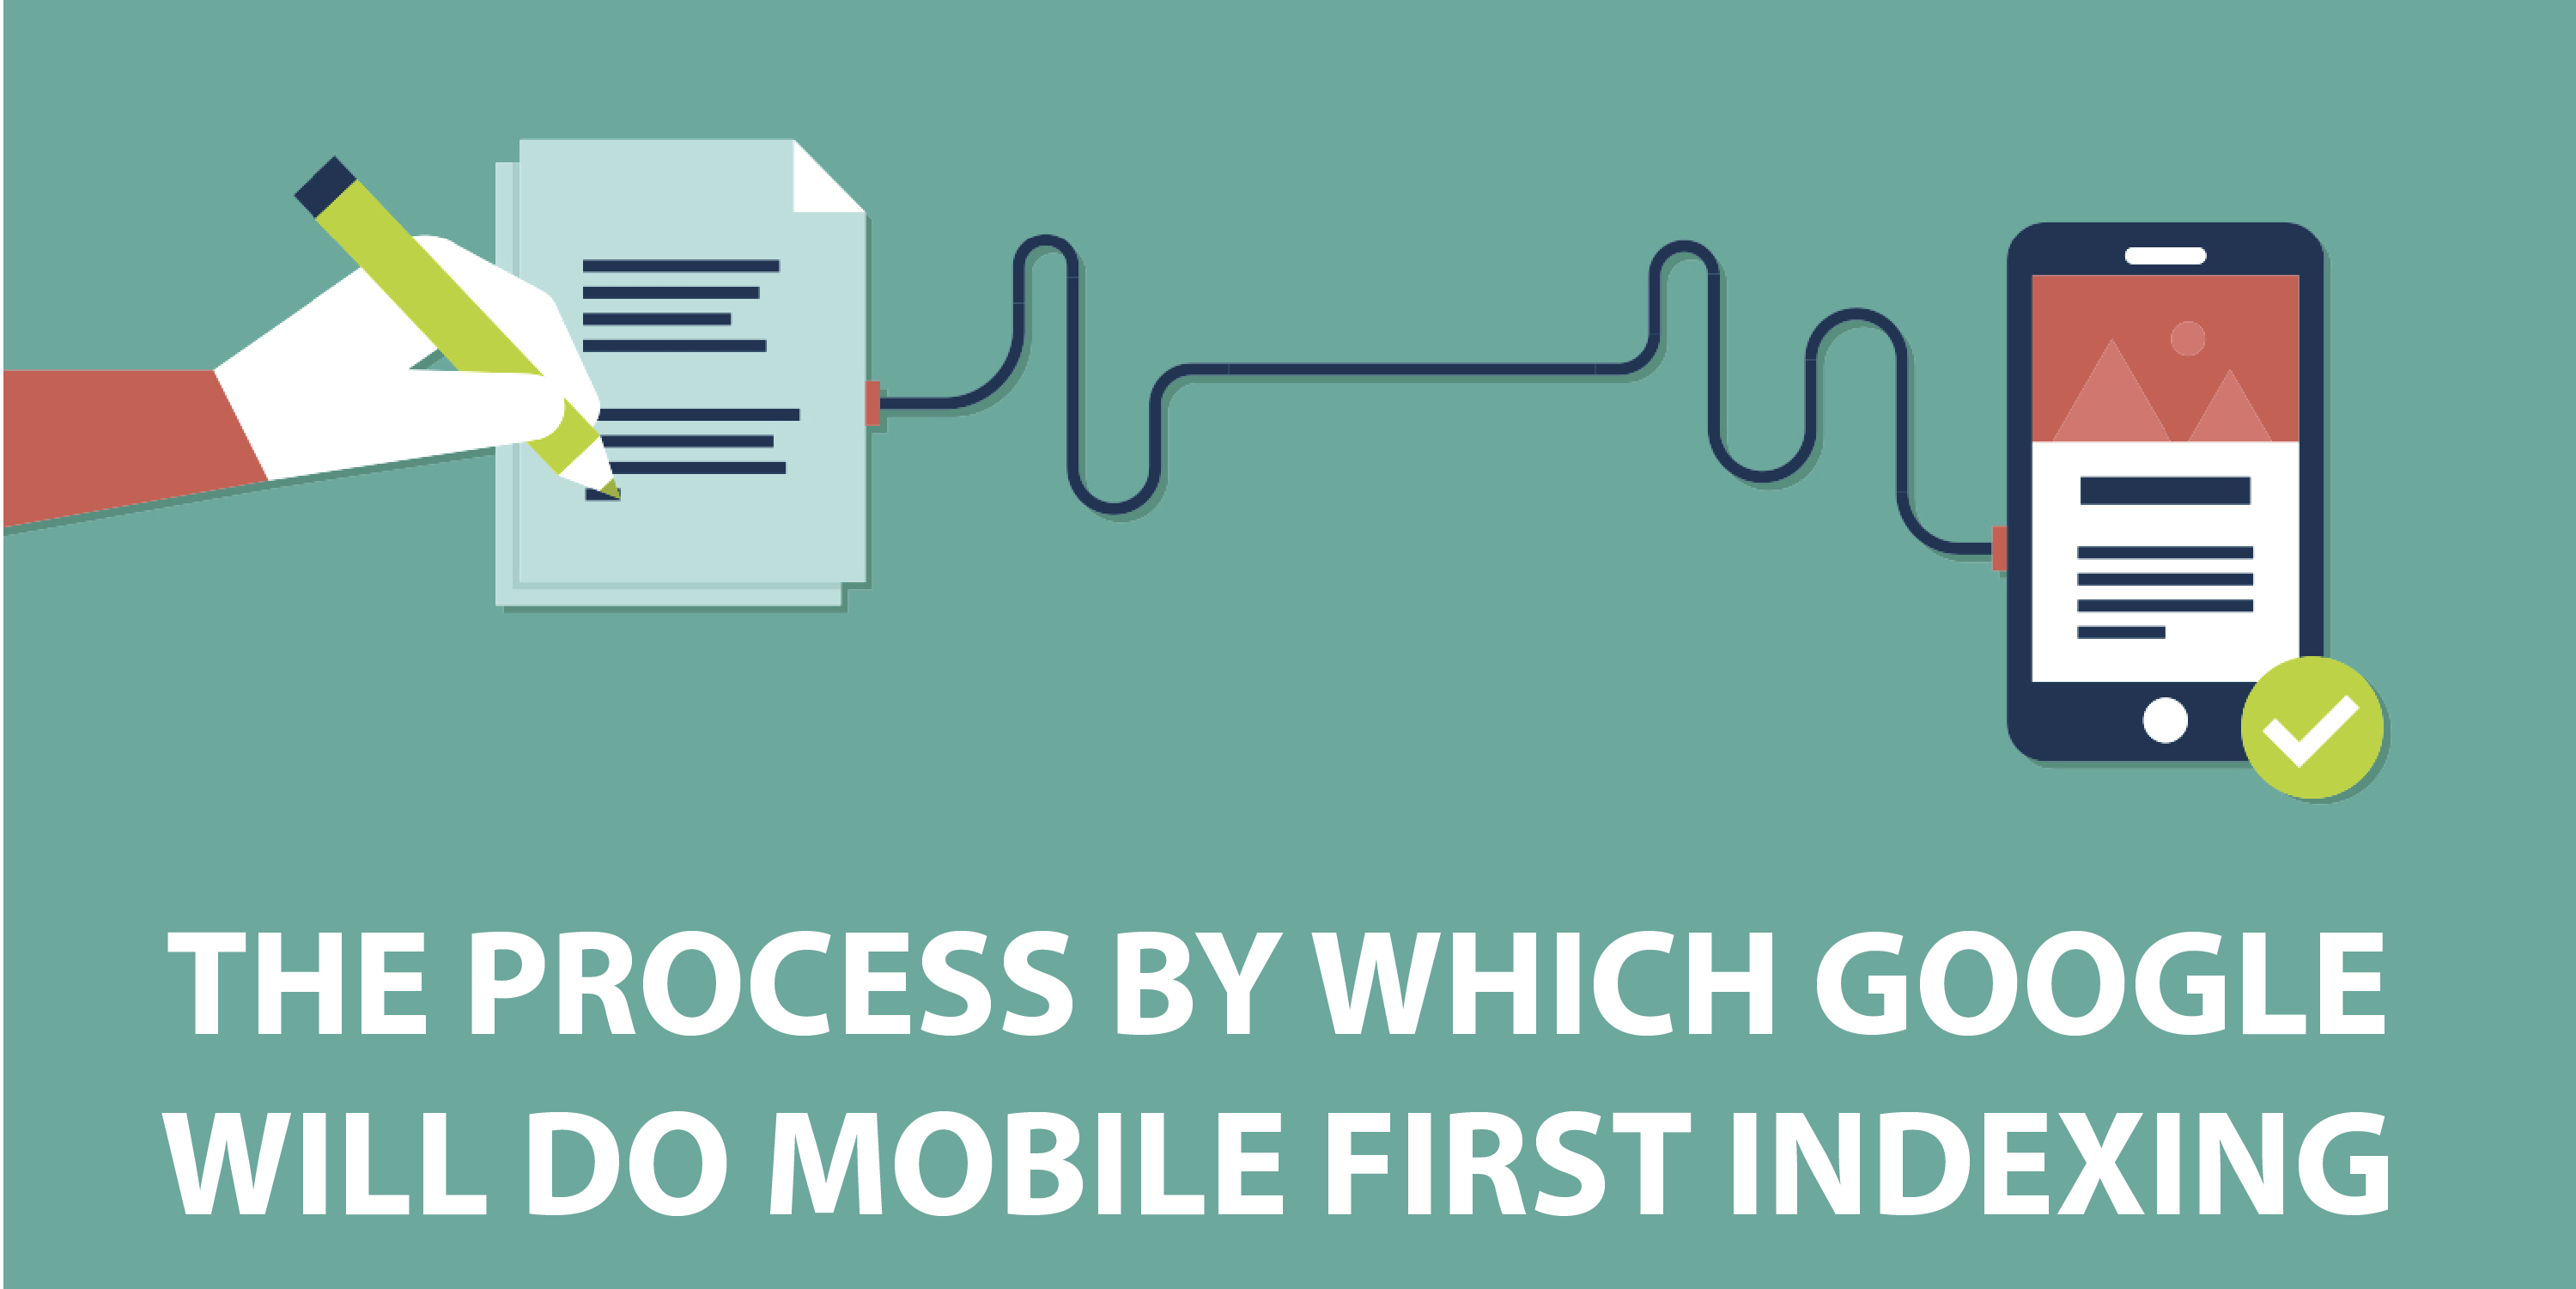 THE PROCESS BY WHICH GOOGLE WILL DO MOBILE FIRST INDEXING